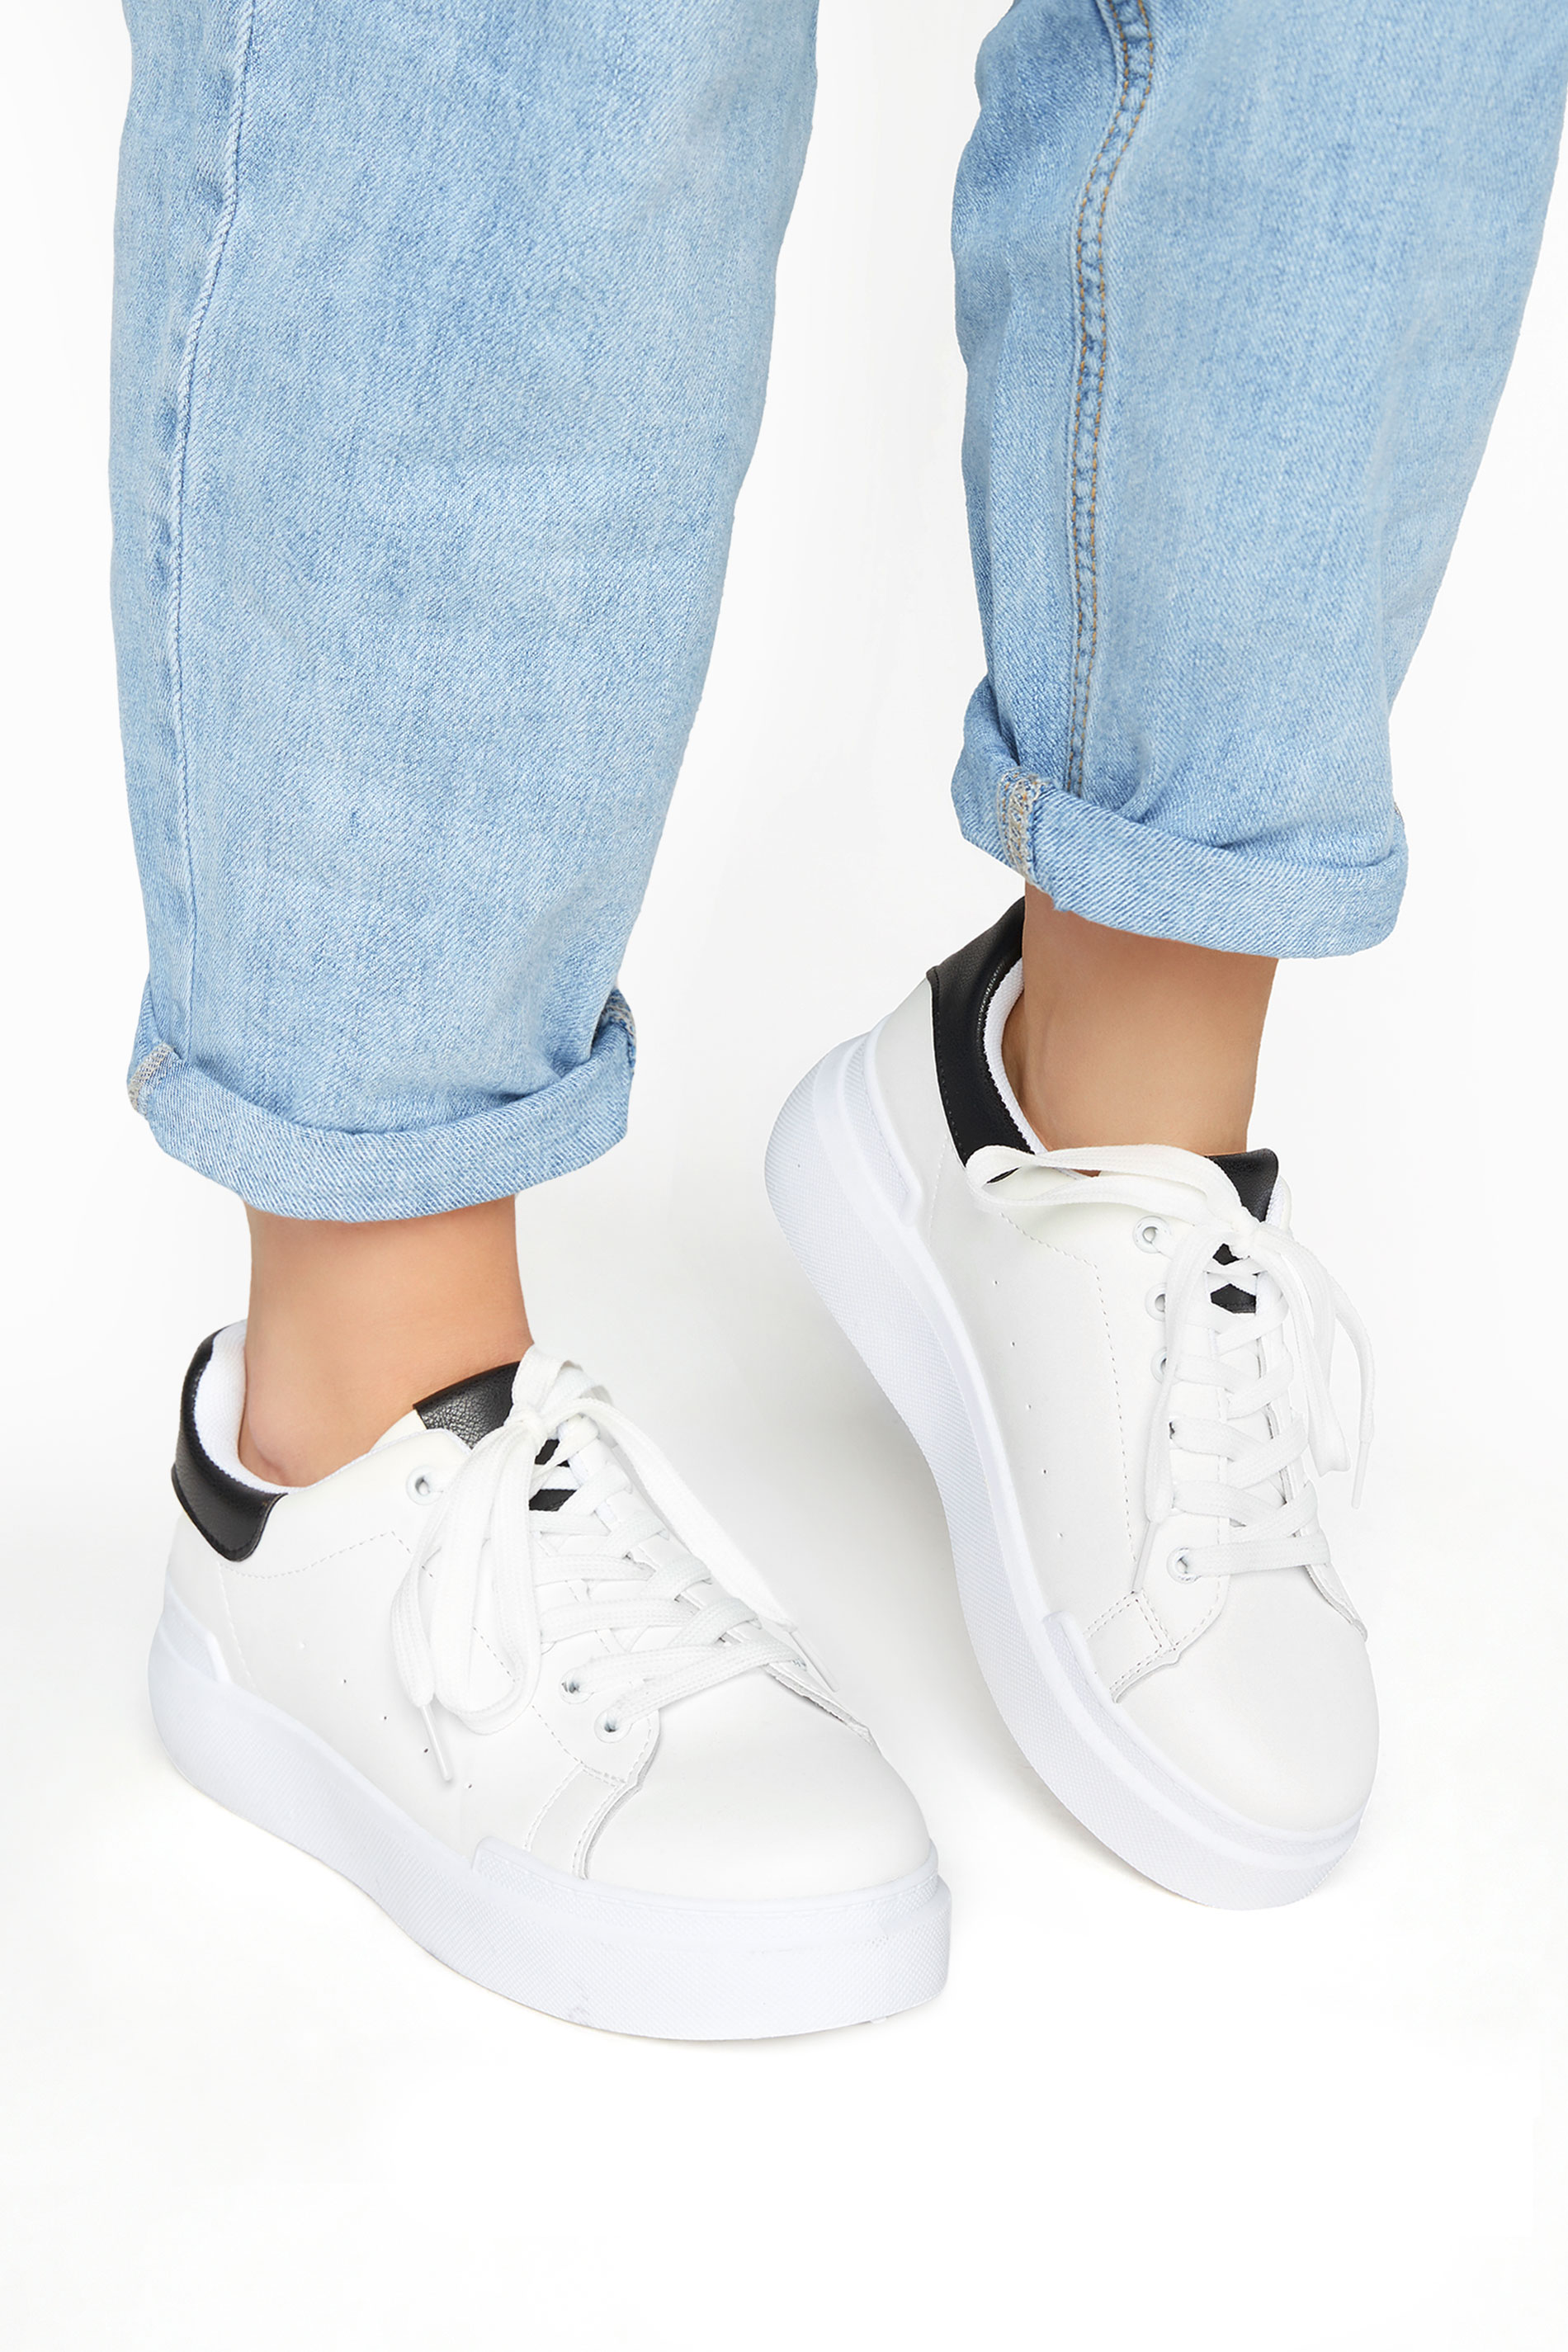 LIMITED COLLECTION White and Black Flatform Trainer In Wide E Fit_M.jpg